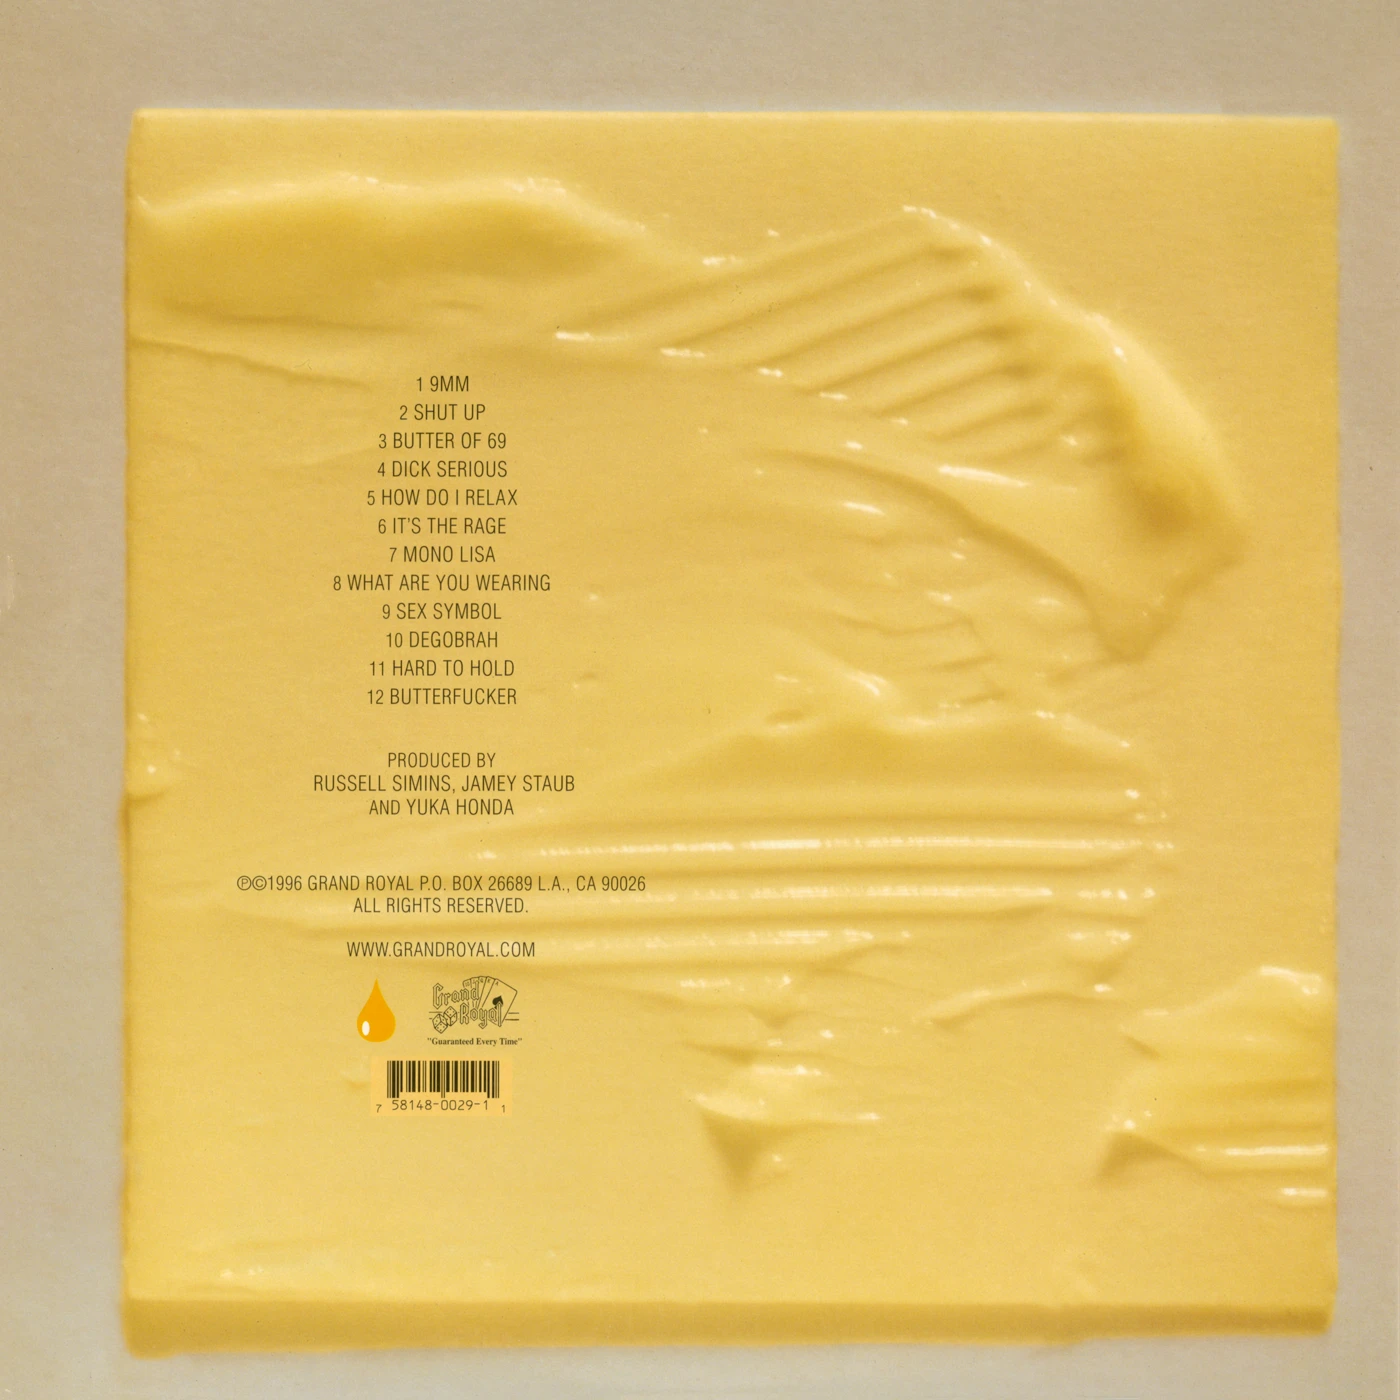 Butter back cover